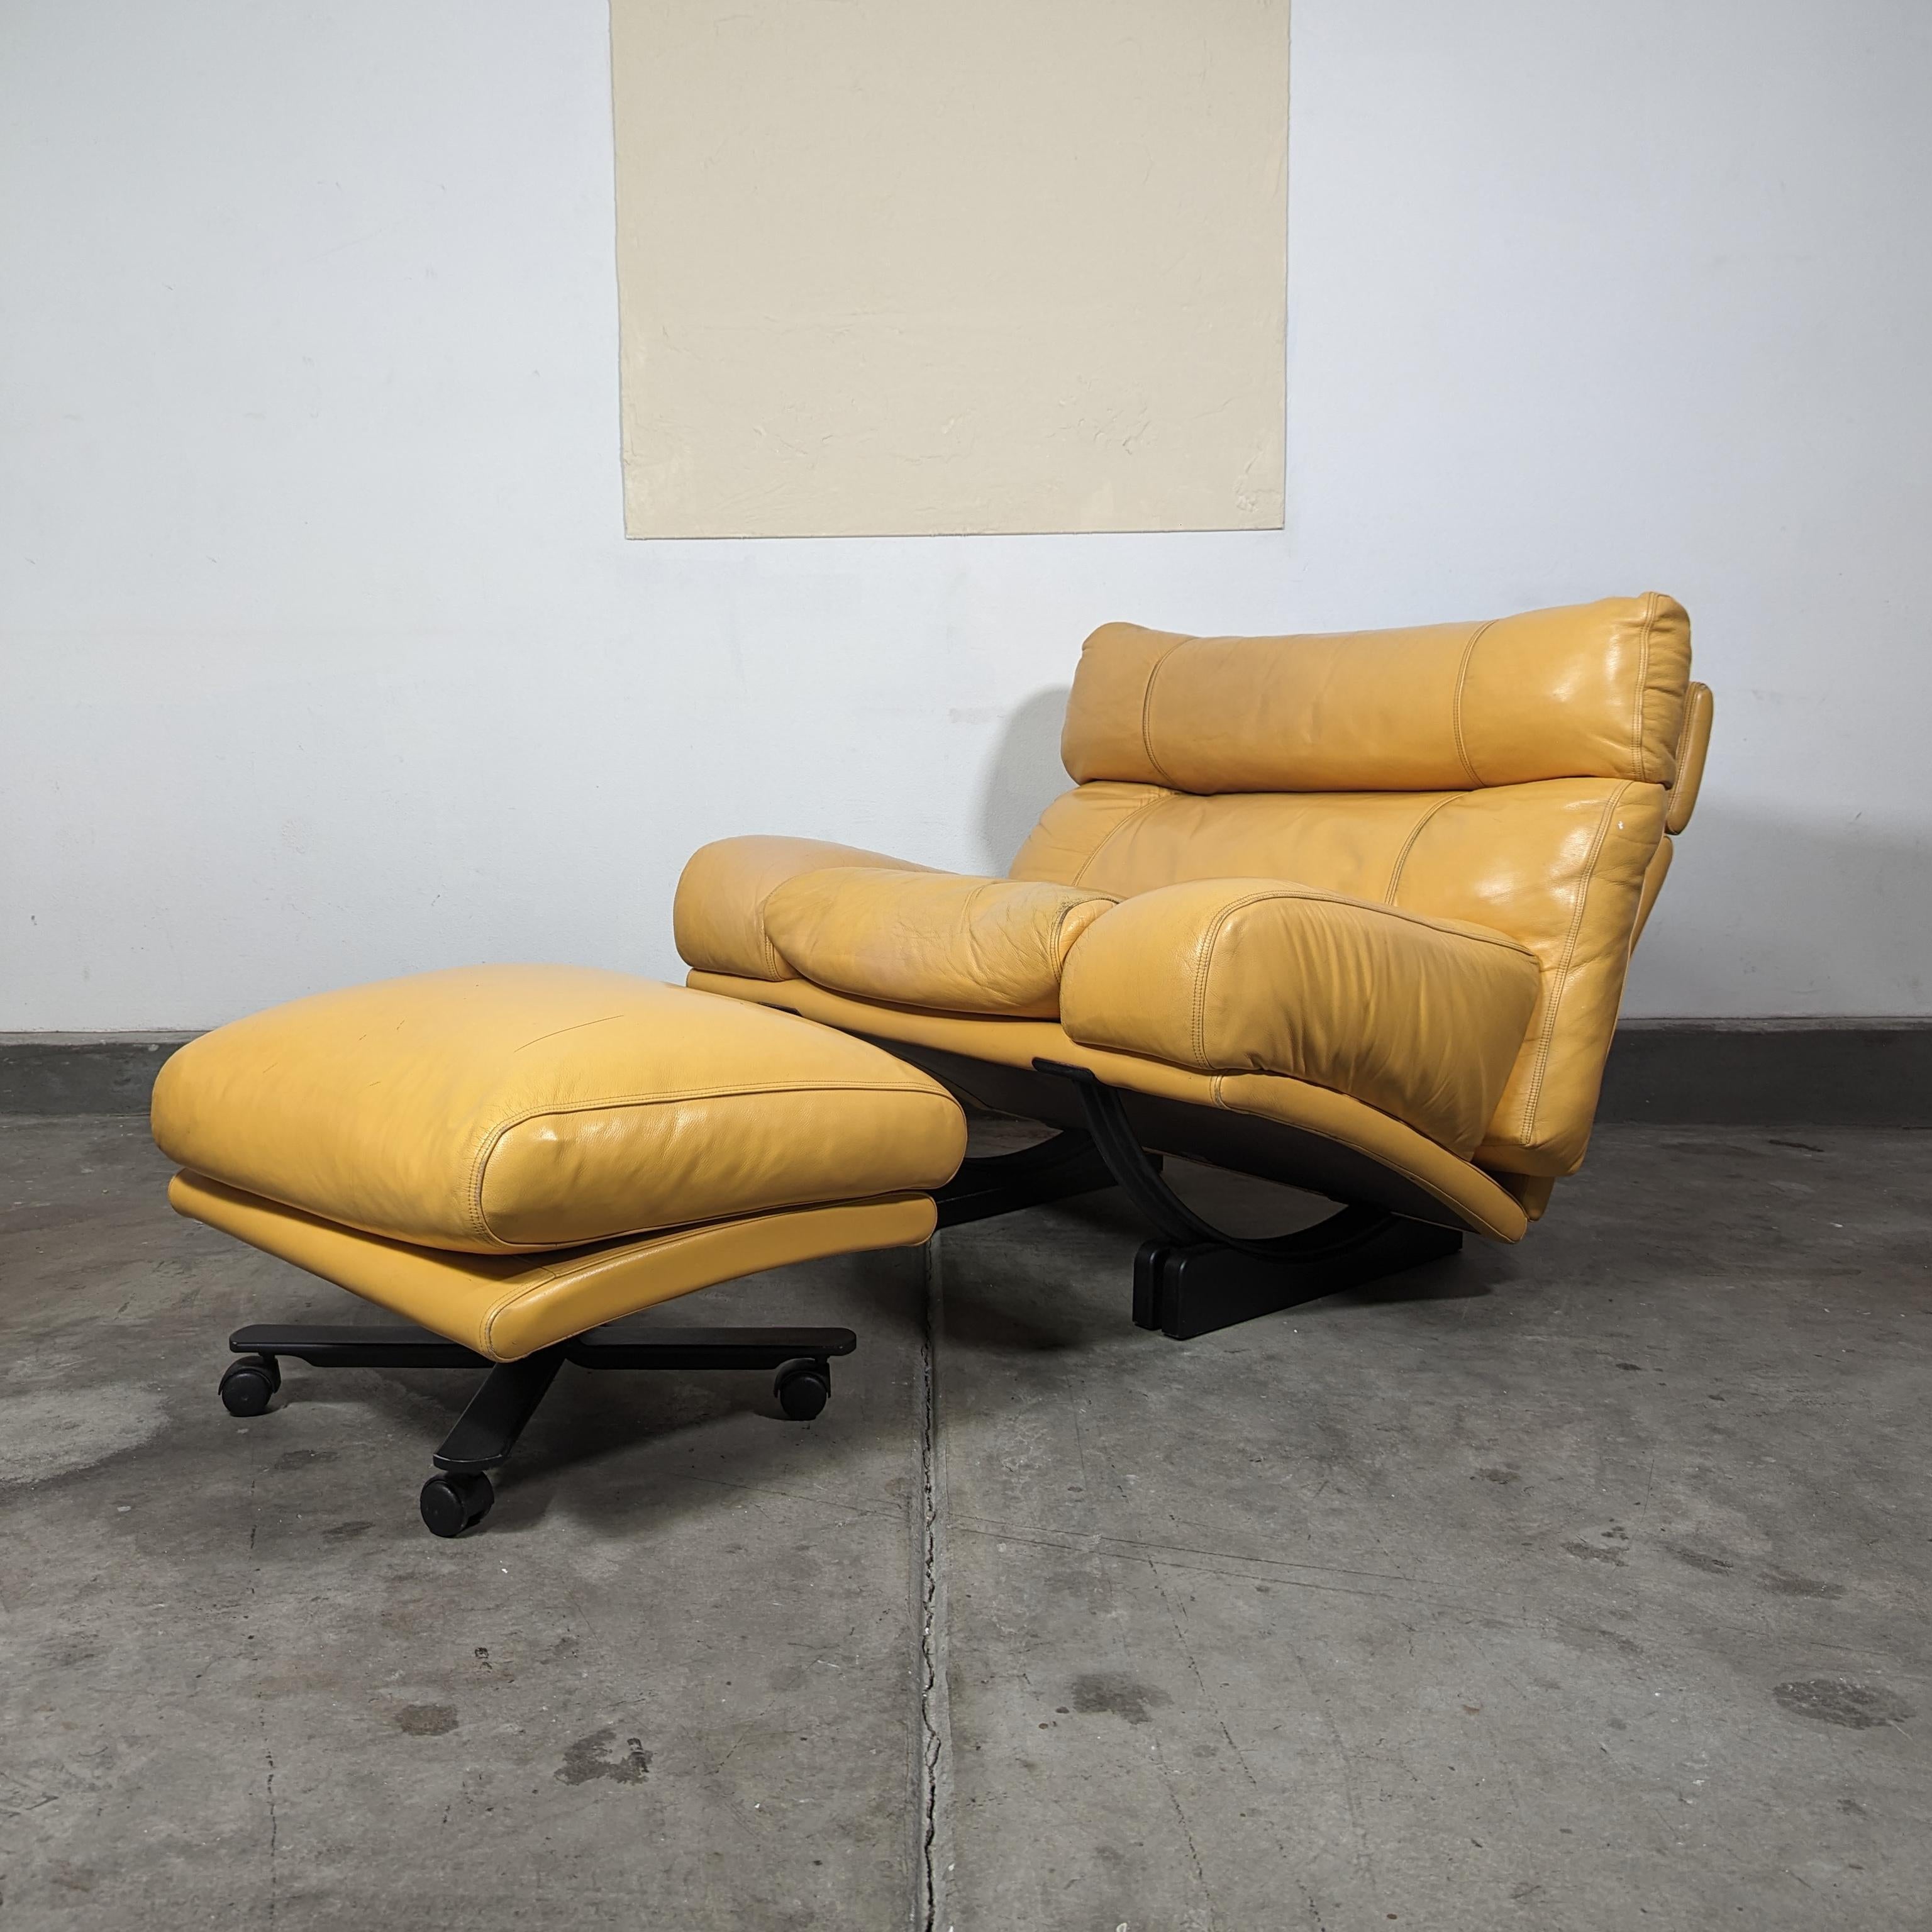 Aluminum Postmodern Walse Leather Lounge Chair by Tito Agnoli for Poltrona Frau, c1990s For Sale